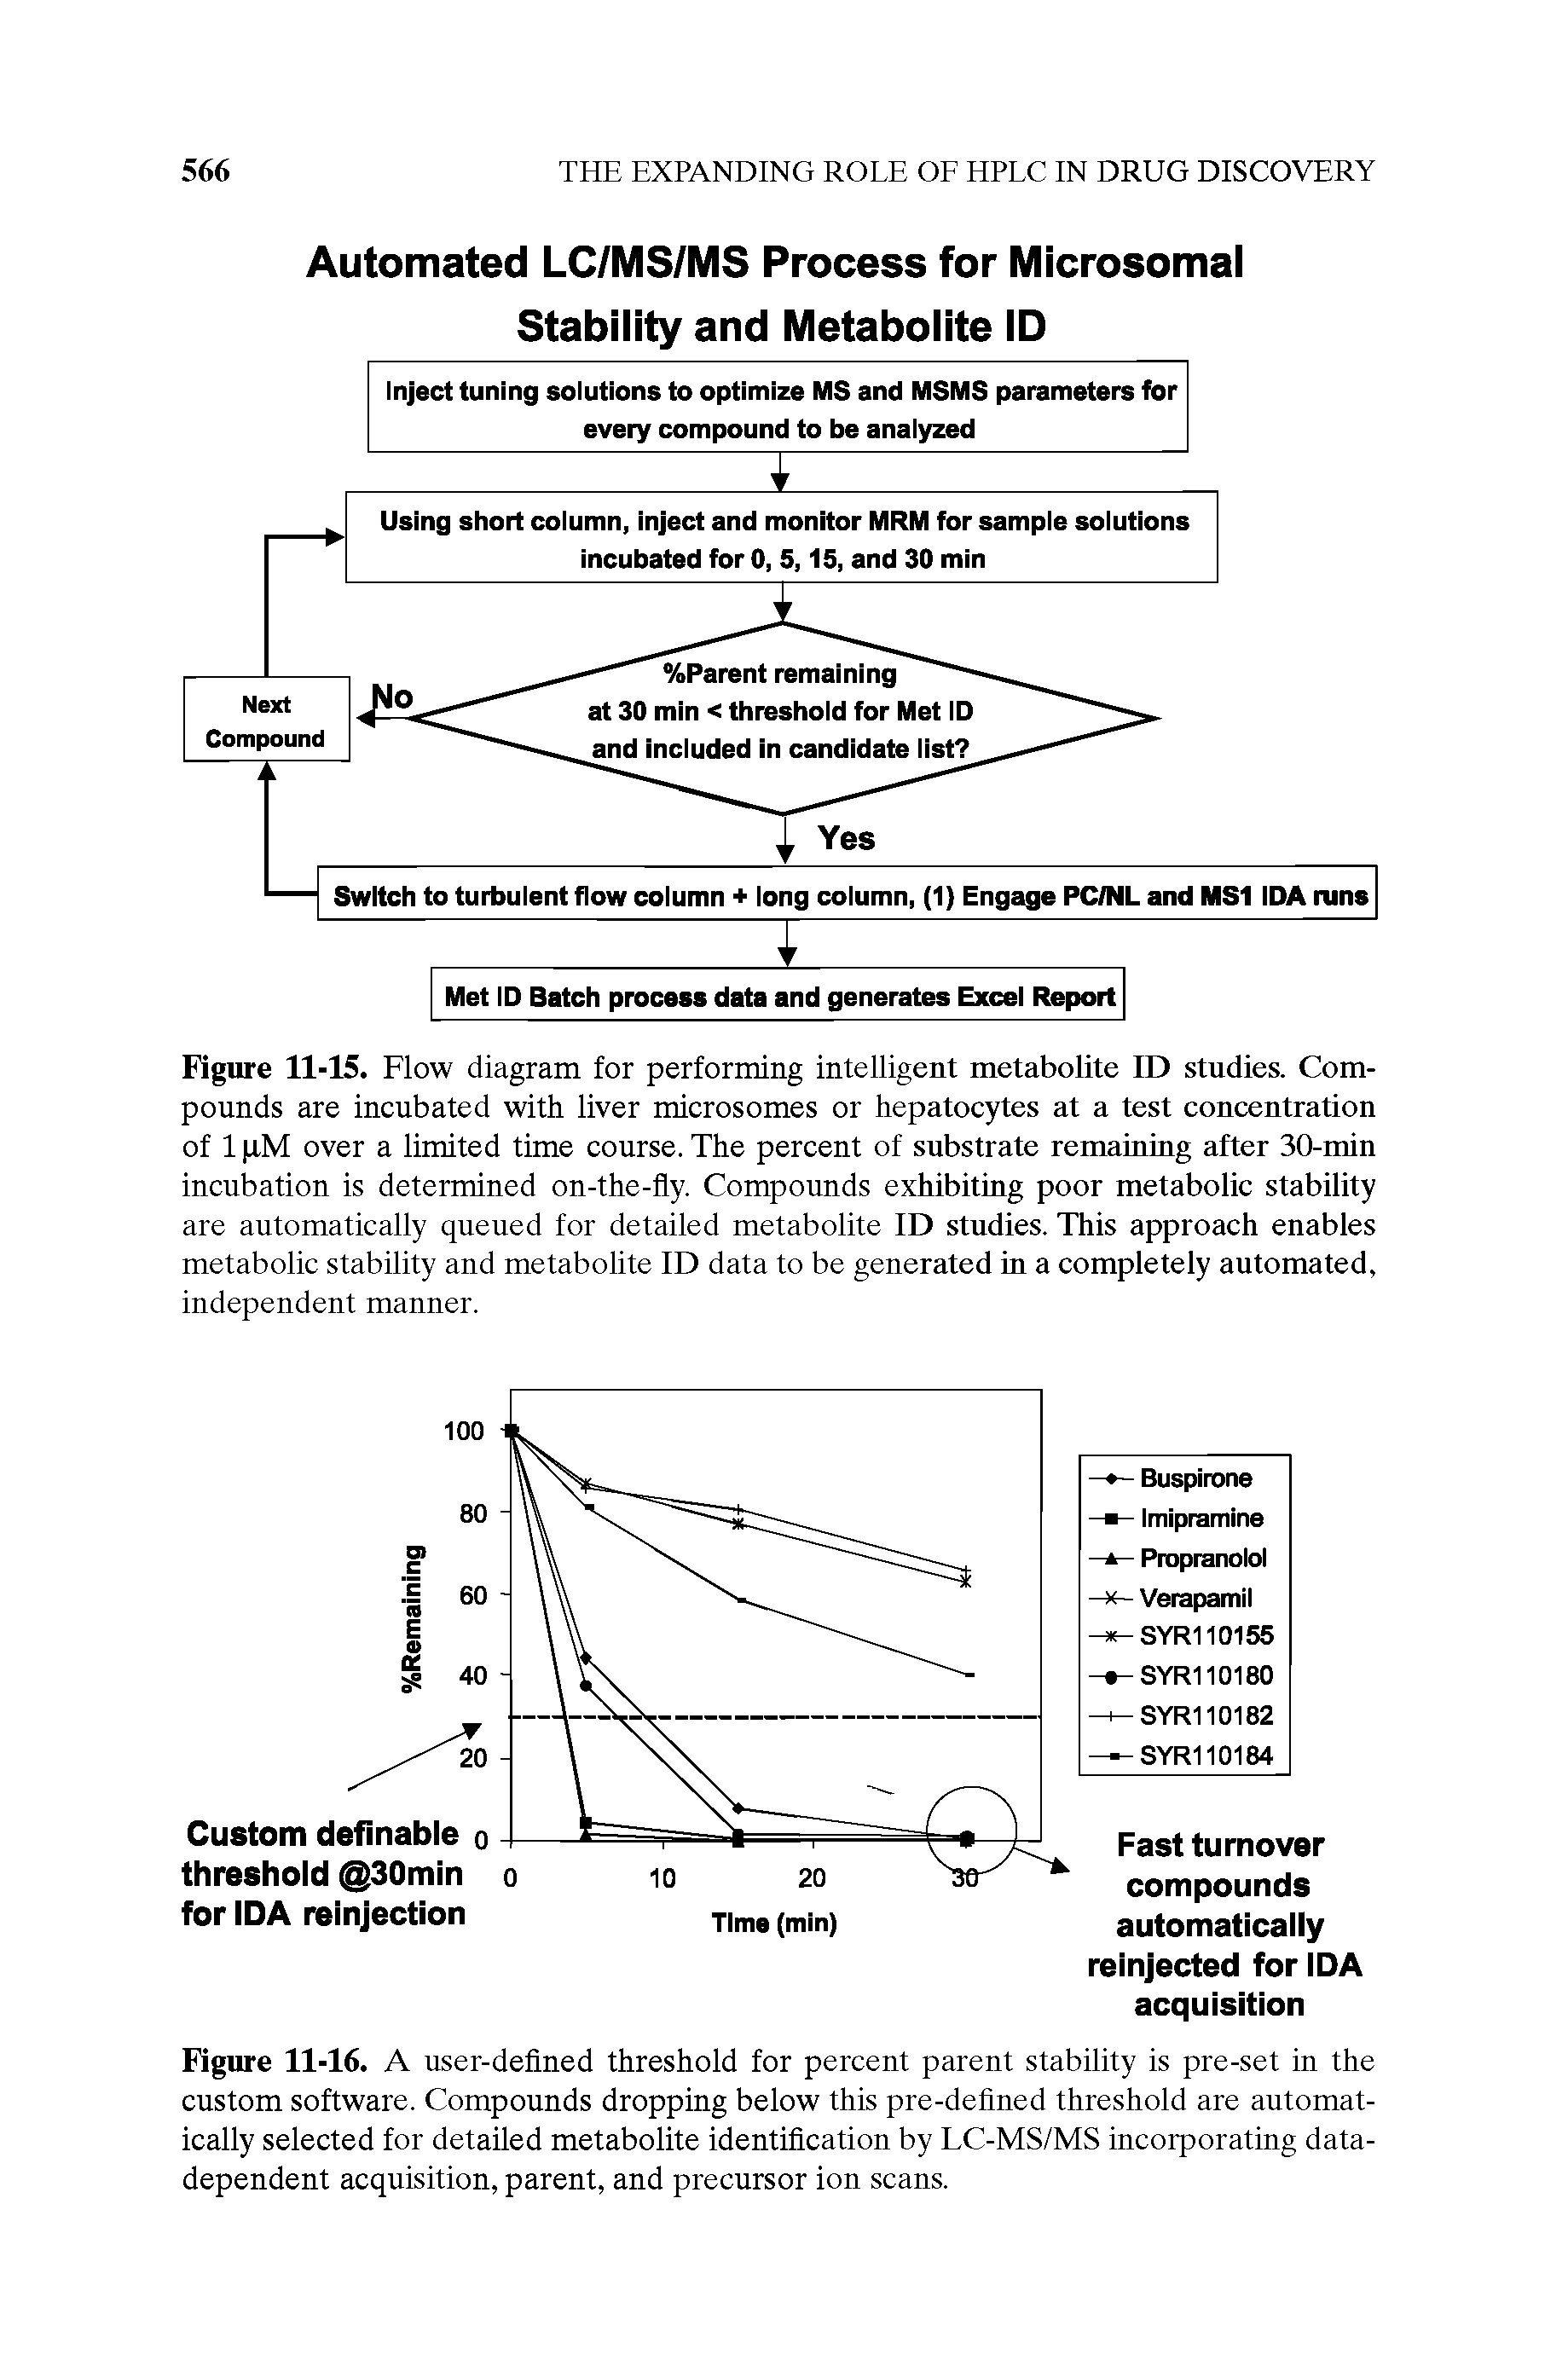 Figure 11-16. A user-defined threshold for percent parent stability is pre-set in the custom software. Compounds dropping below this pre-defined threshold are automatically selected for detailed metabolite identification by LC-MS/MS incorporating data-dependent acquisition, parent, and precursor ion scans.